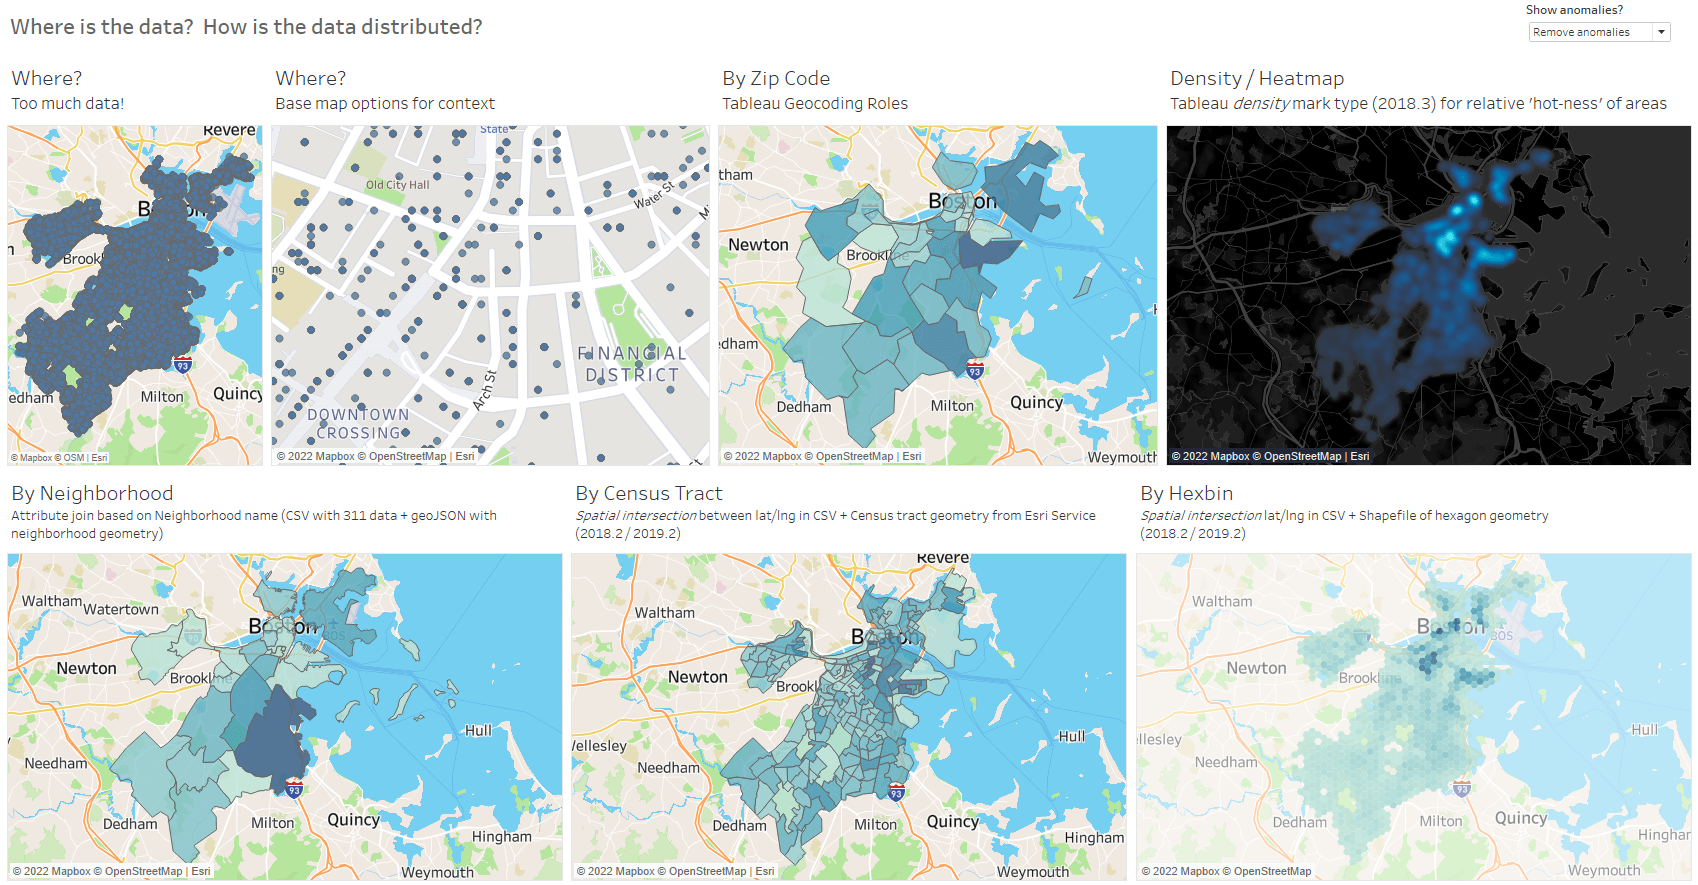 Six maps of the Boston area, each telling a different story. Clockwise, from top left: Where (too much data); where (base map options for context); by ZIP code; density/heatmap; by neighborhood; by Census tract; by Hexbin